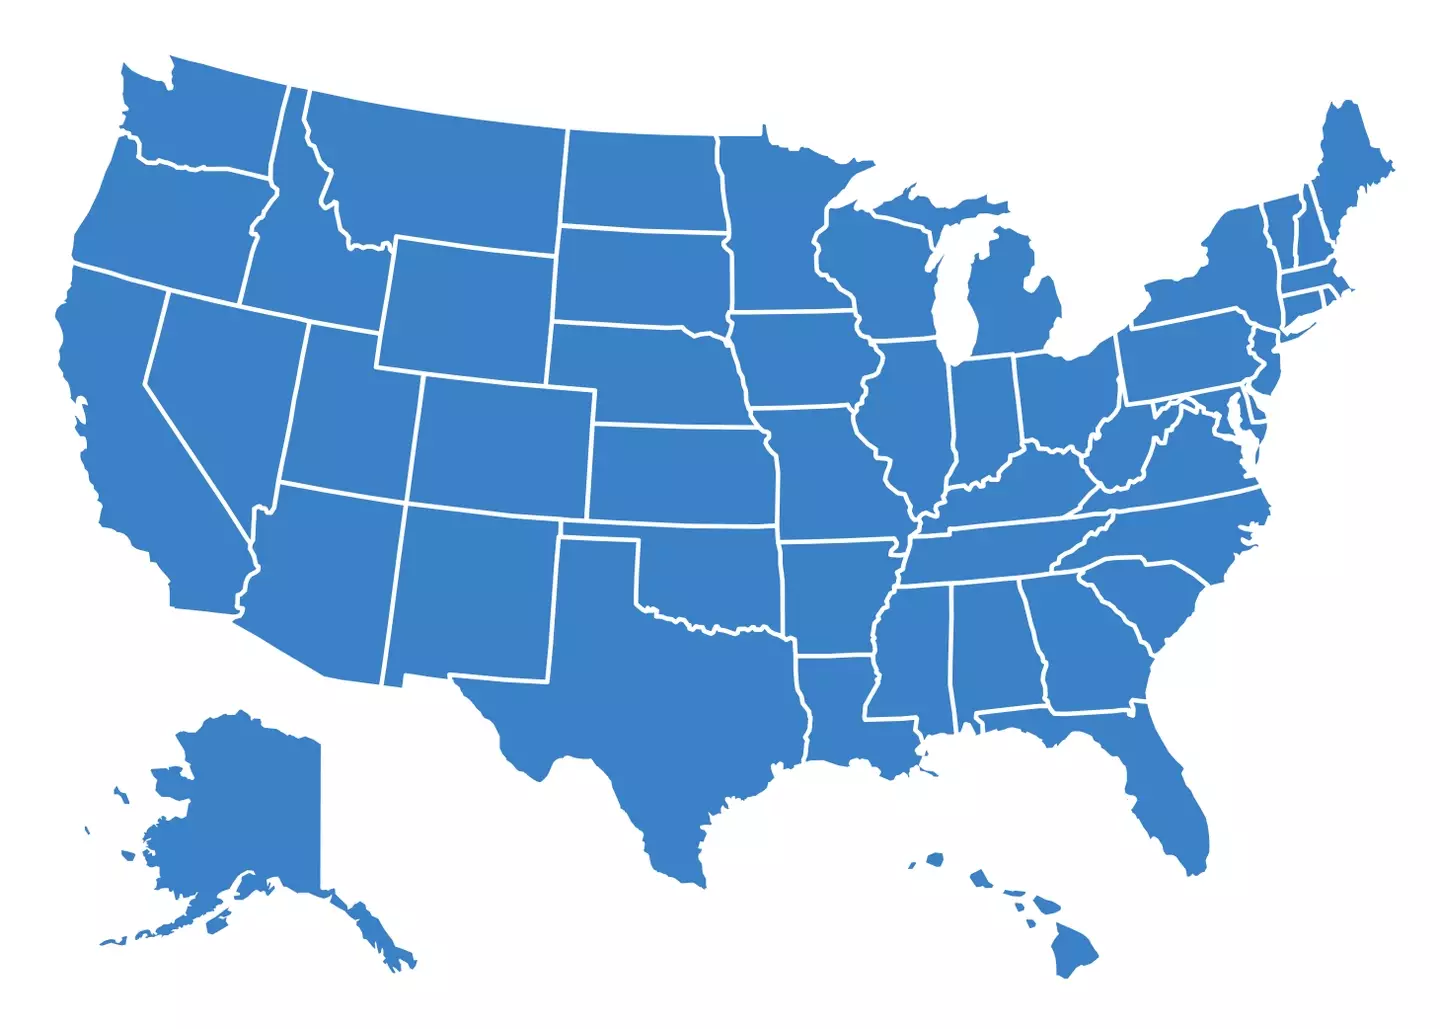 Which states have the highest populations?